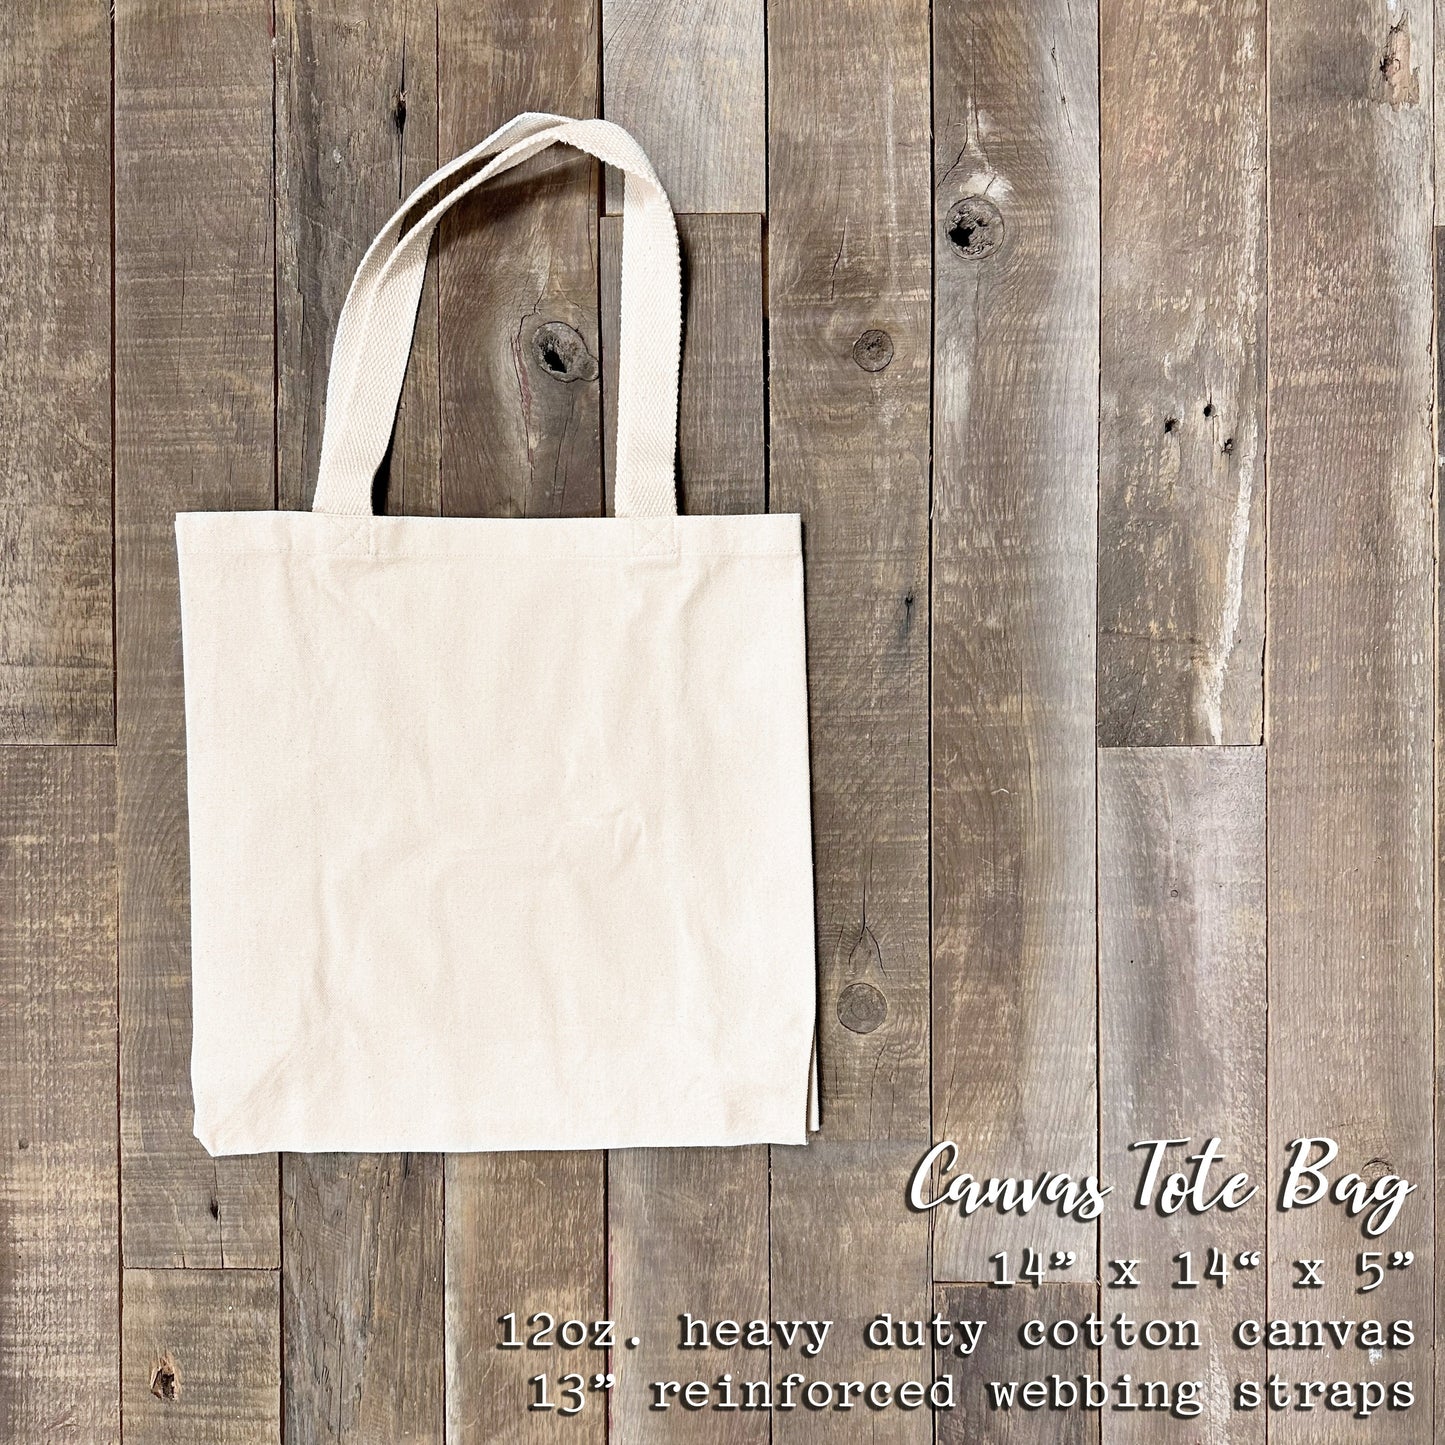 Kindness Is In - Canvas Tote Bag